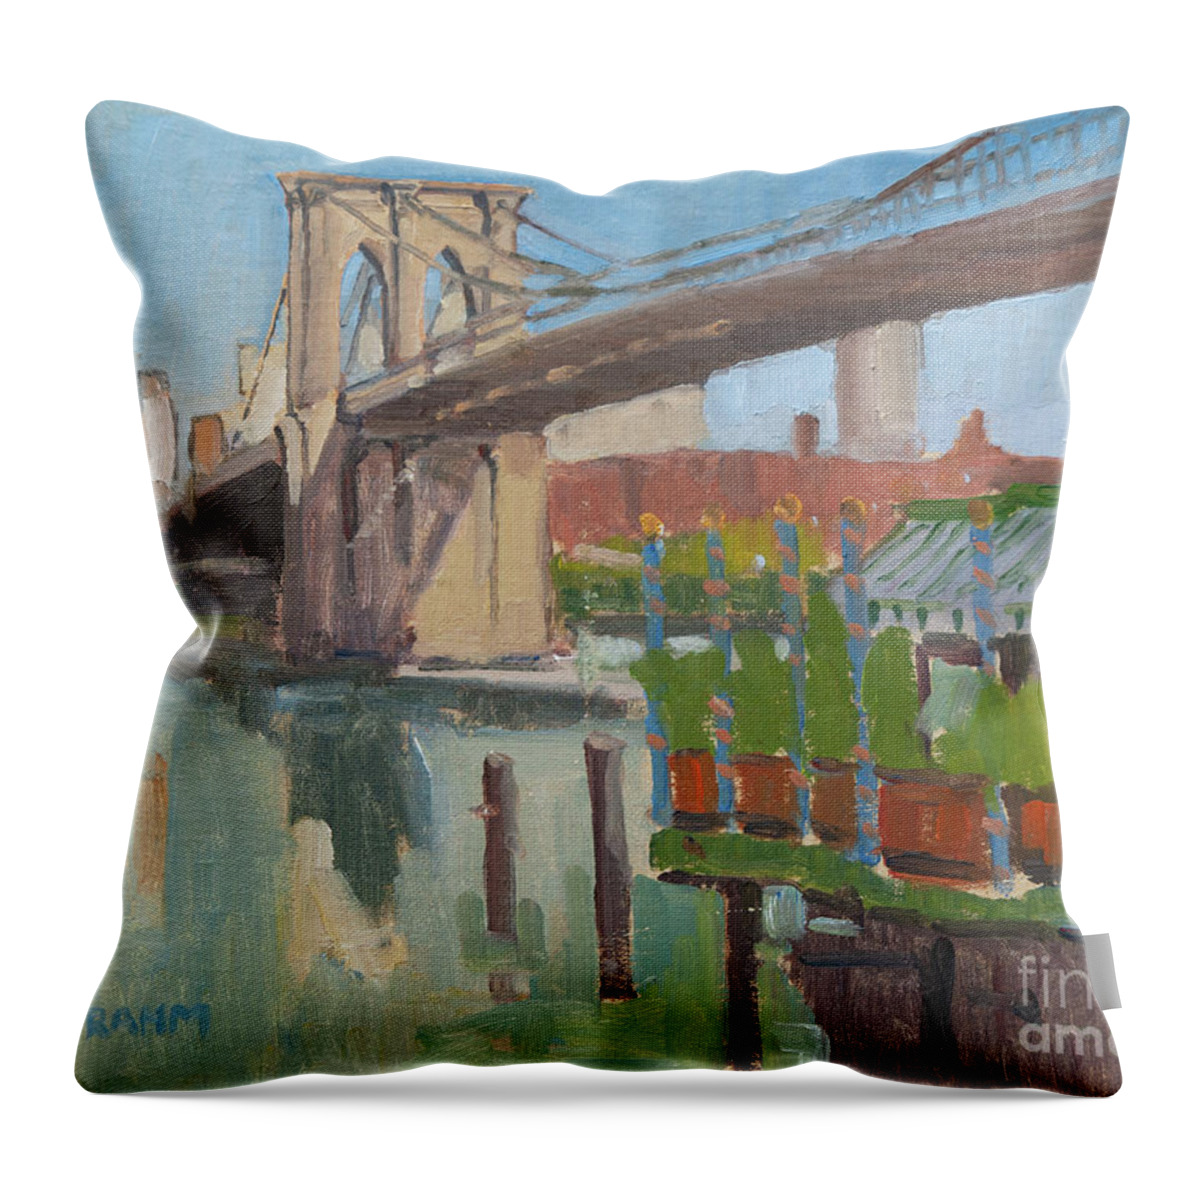 Brooklyn Bridge Throw Pillow featuring the painting Brooklyn Bridge at River Cafe - New York City by Paul Strahm